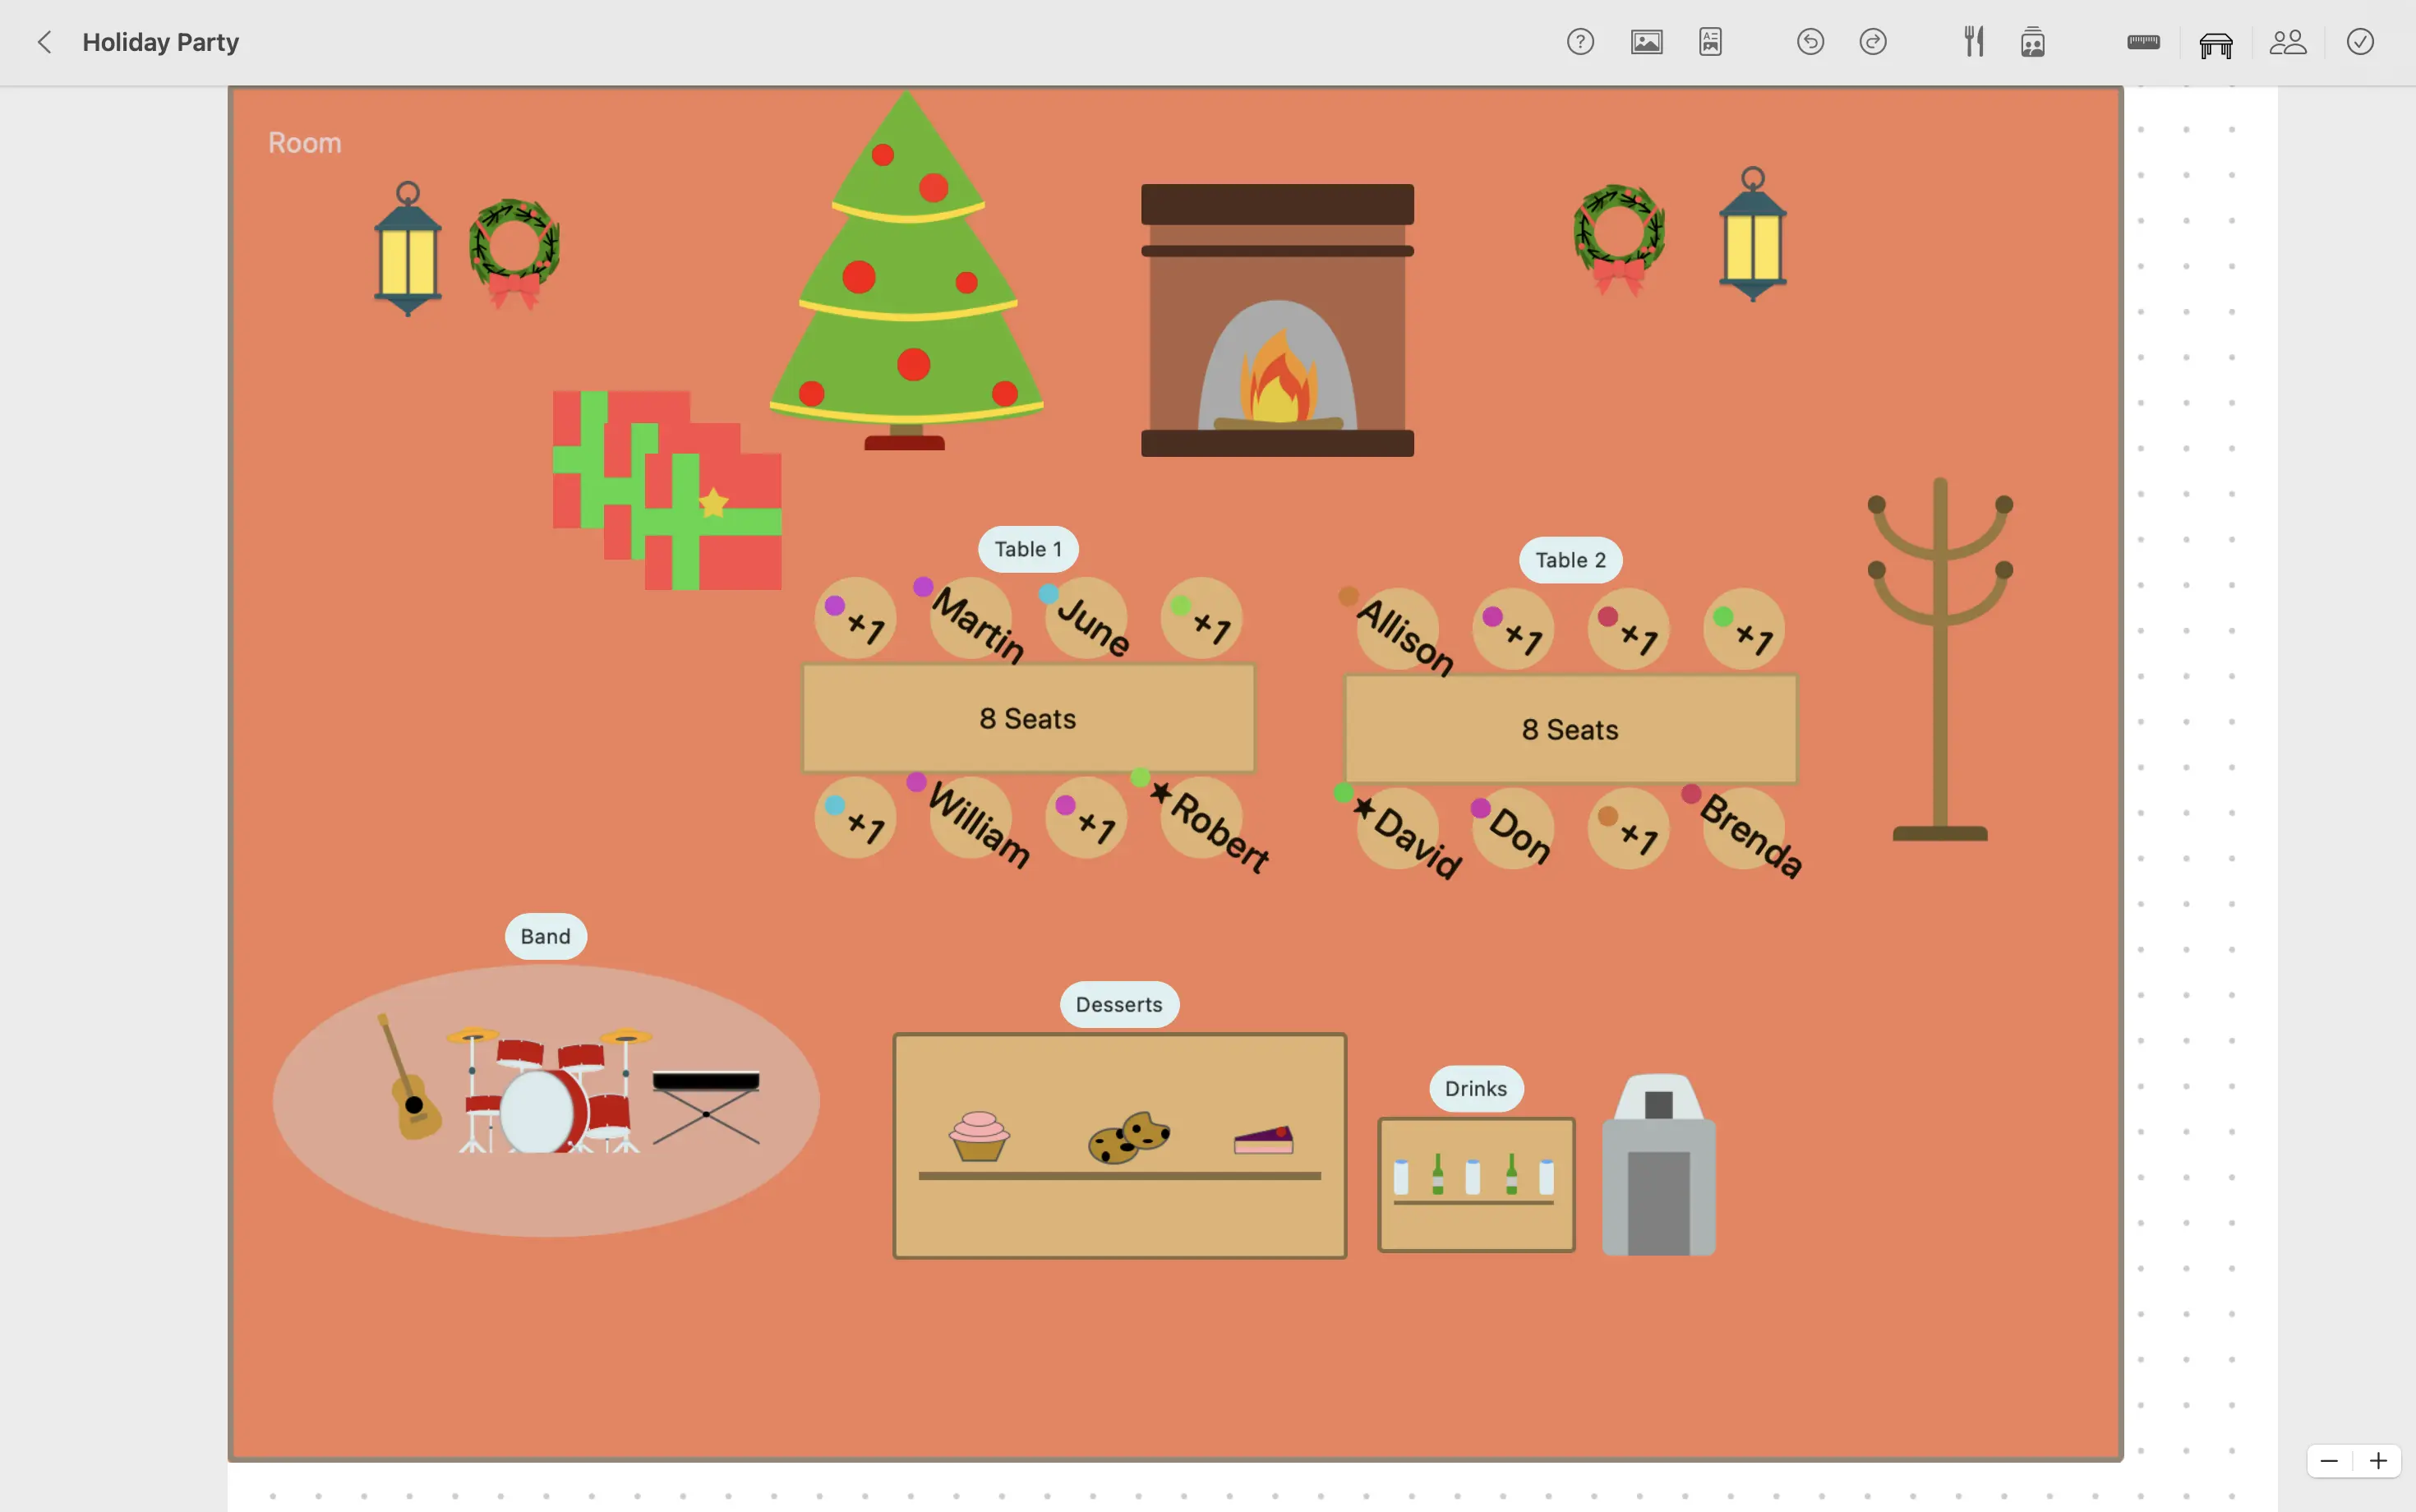 Example of a holiday party layout and diagram